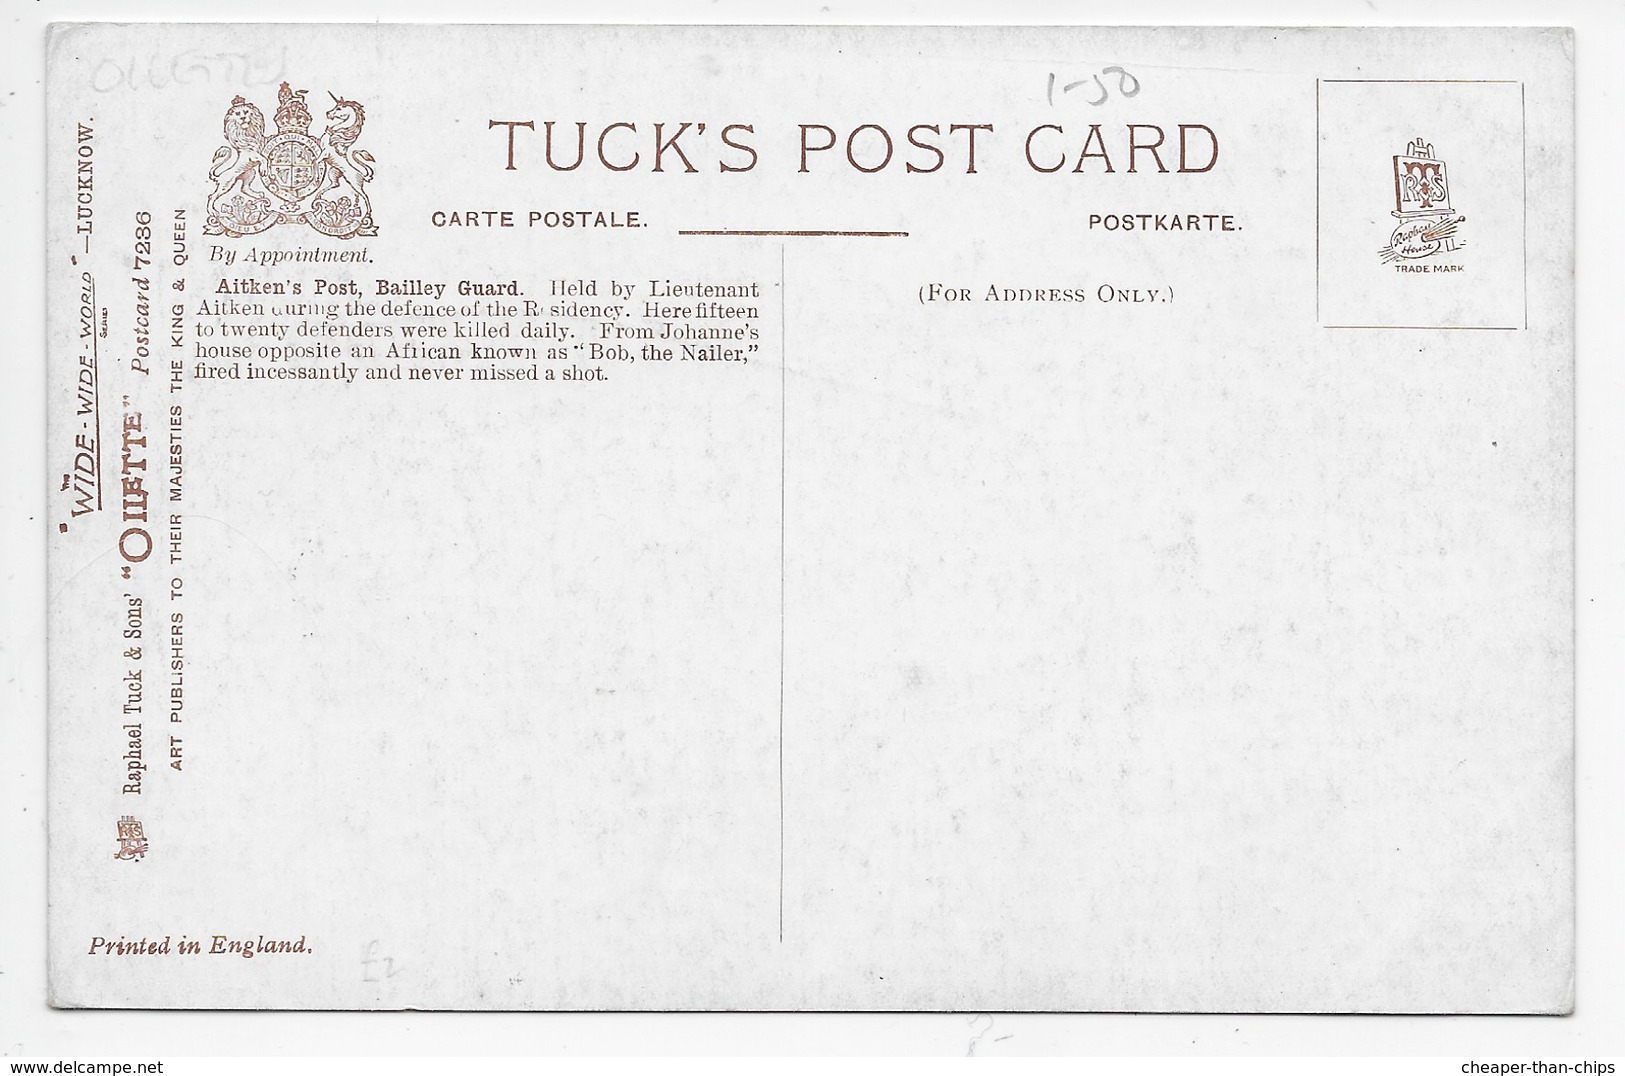 Aitkin's Post, Bailey Guard, Lucknow - Tuck Oilette 7236 - India